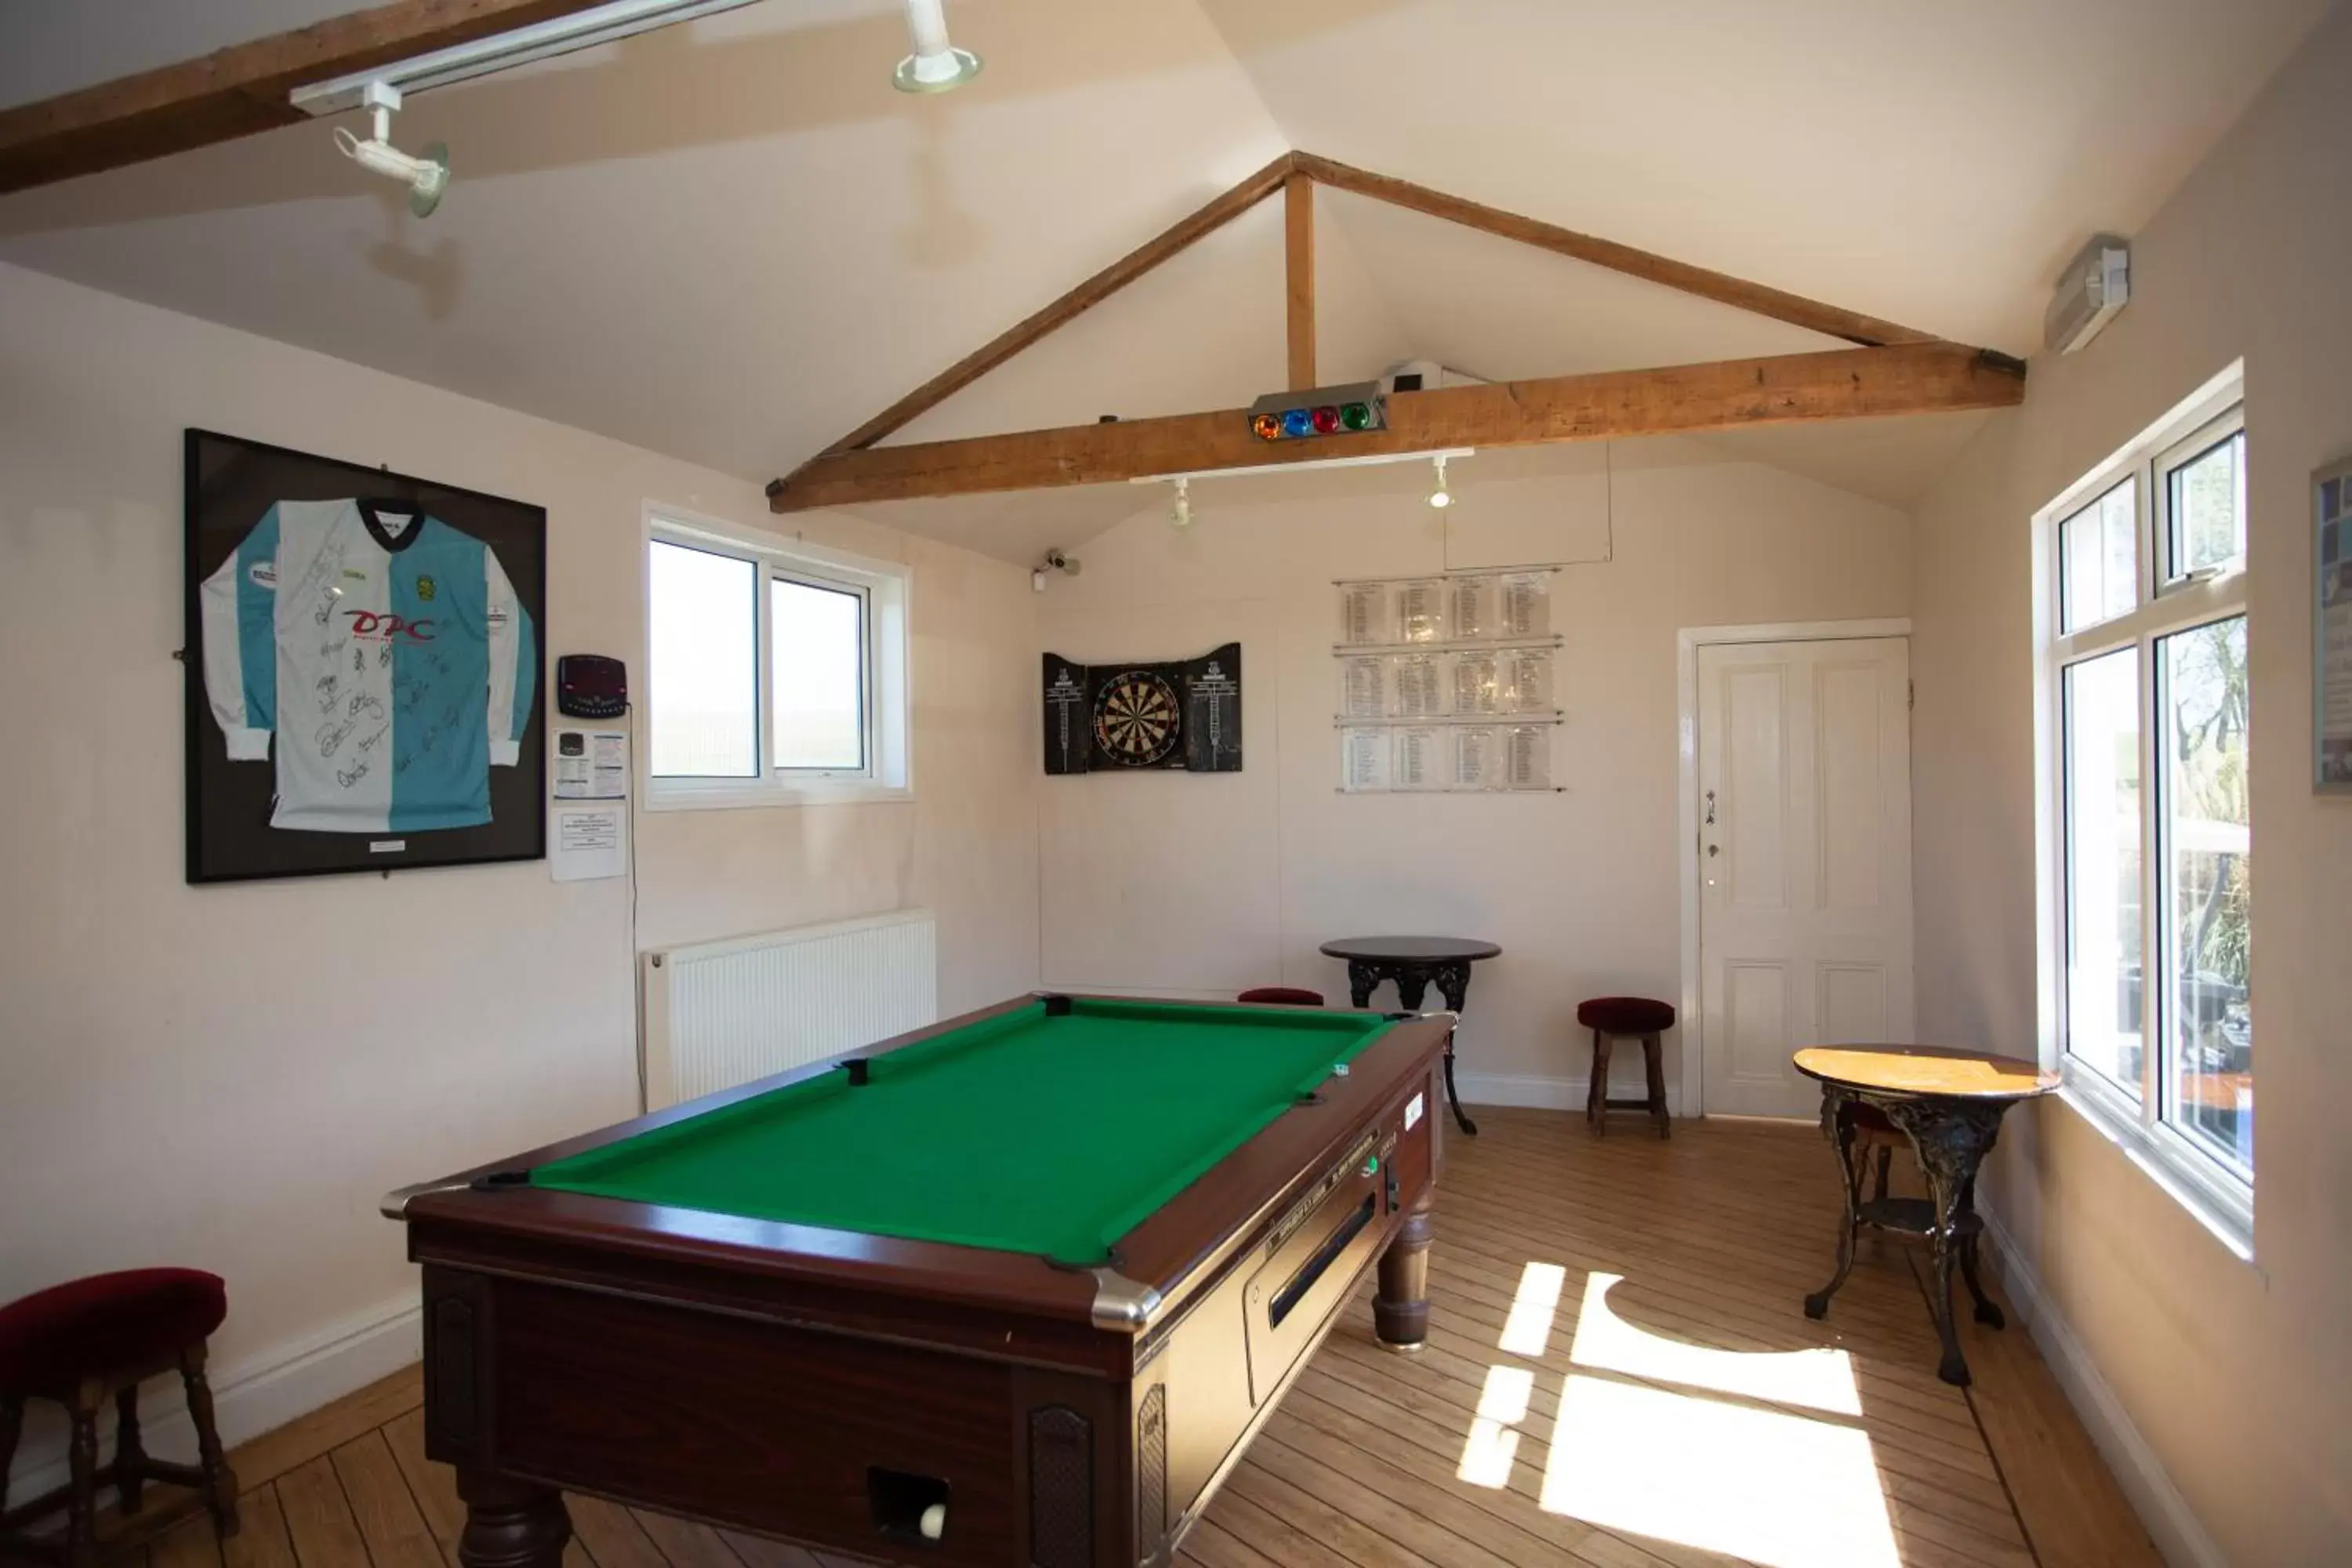 Lounge or bar, Billiards in Links Country Park Hotel